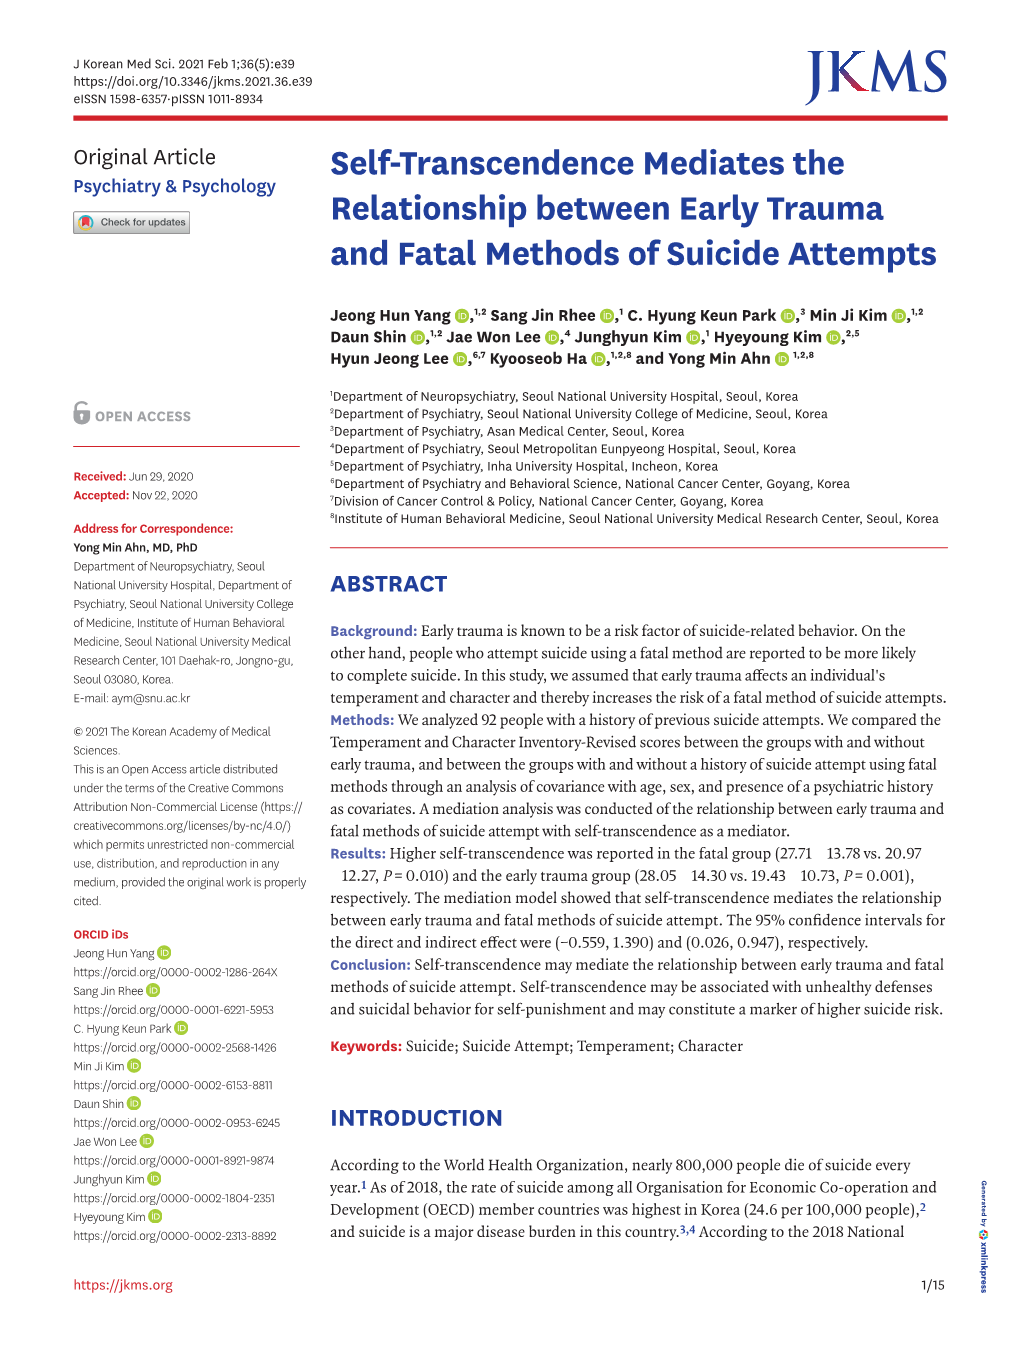 Self-Transcendence Mediates the Relationship Between Early Trauma and Fatal Methods of Suicide Attempts